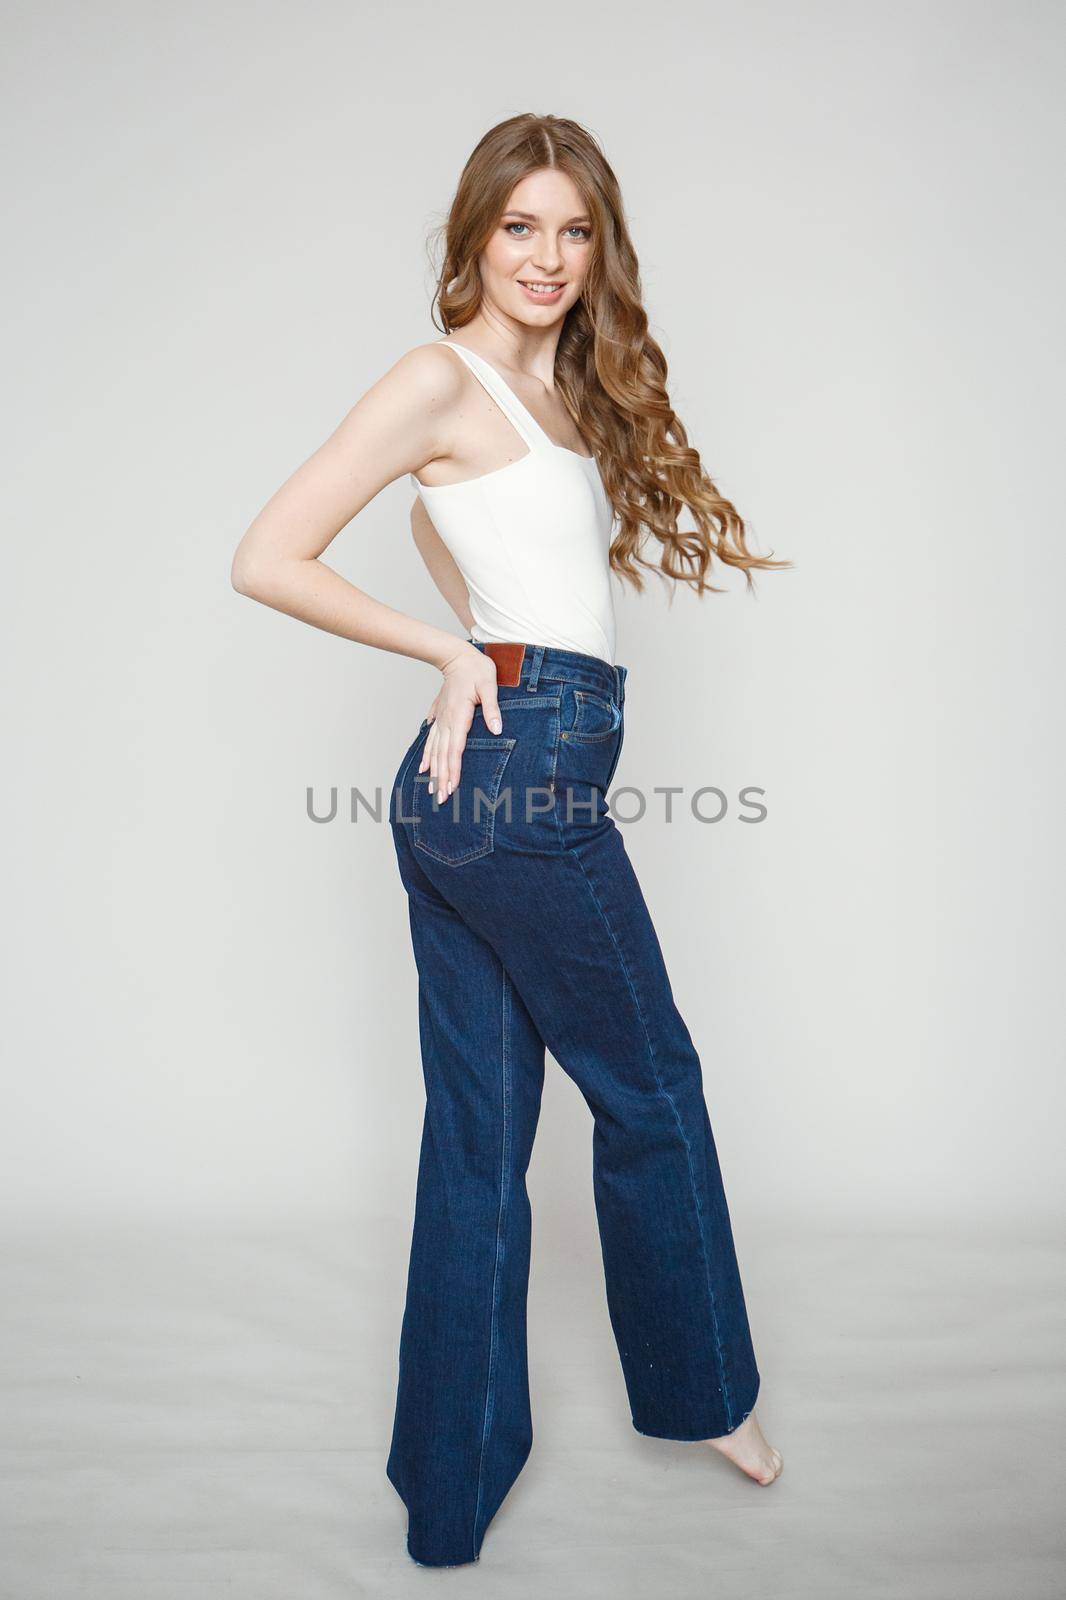 Legs in jeans to beautiful girl. Isolated on background